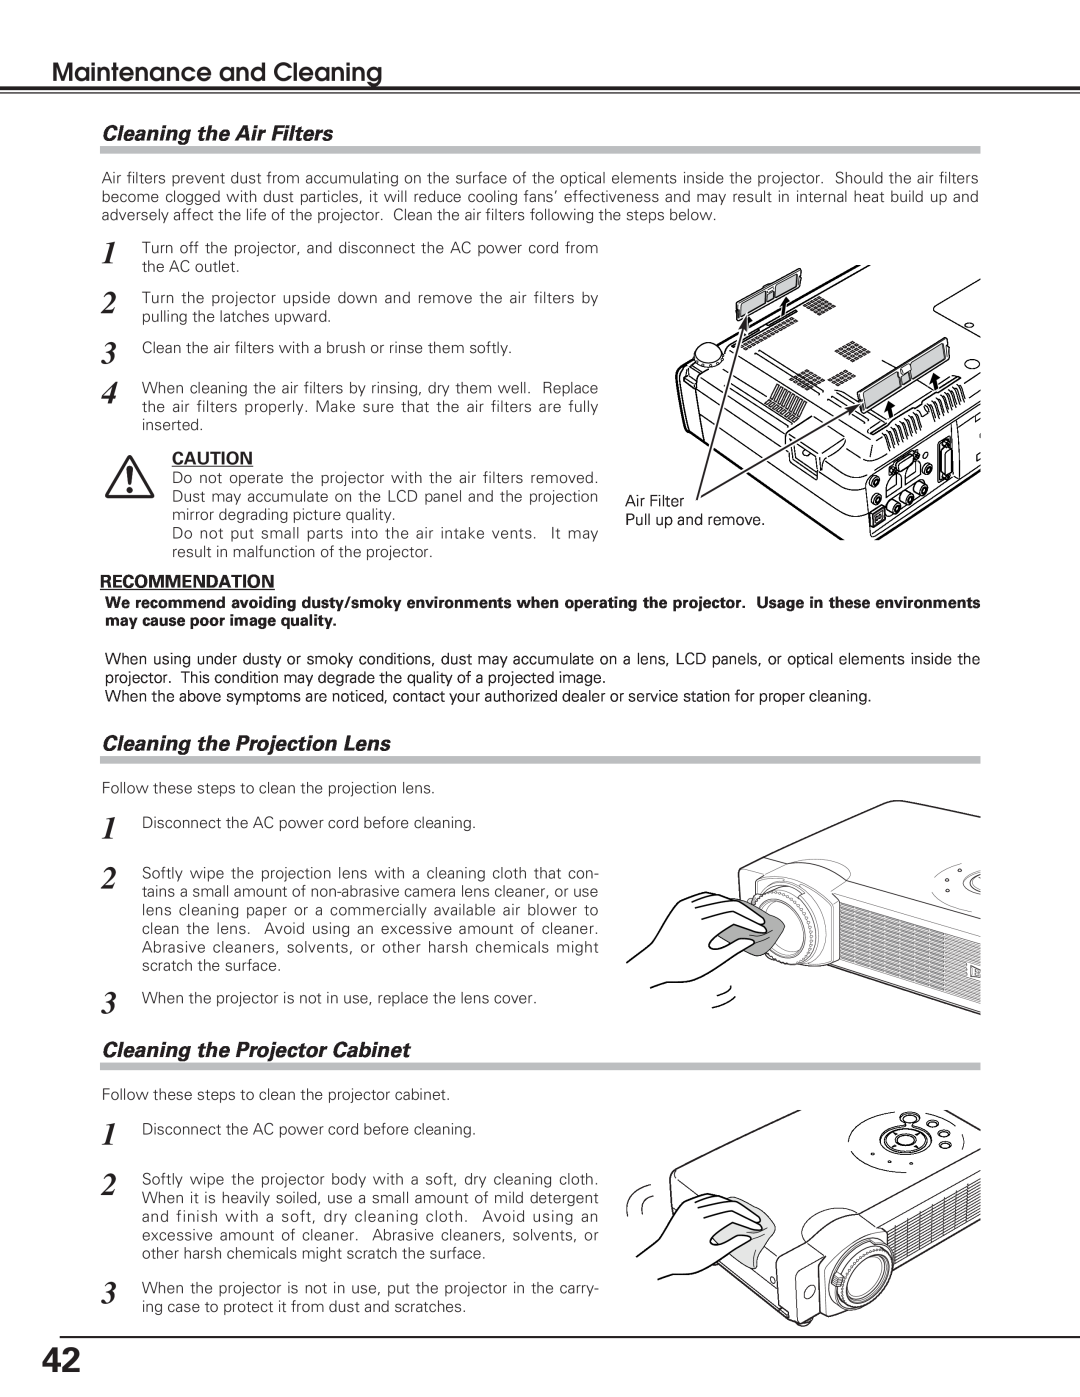 Eiki LC-XB15 owner manual Maintenance and Cleaning, Cleaning the Air Filters, Cleaning the Projection Lens 